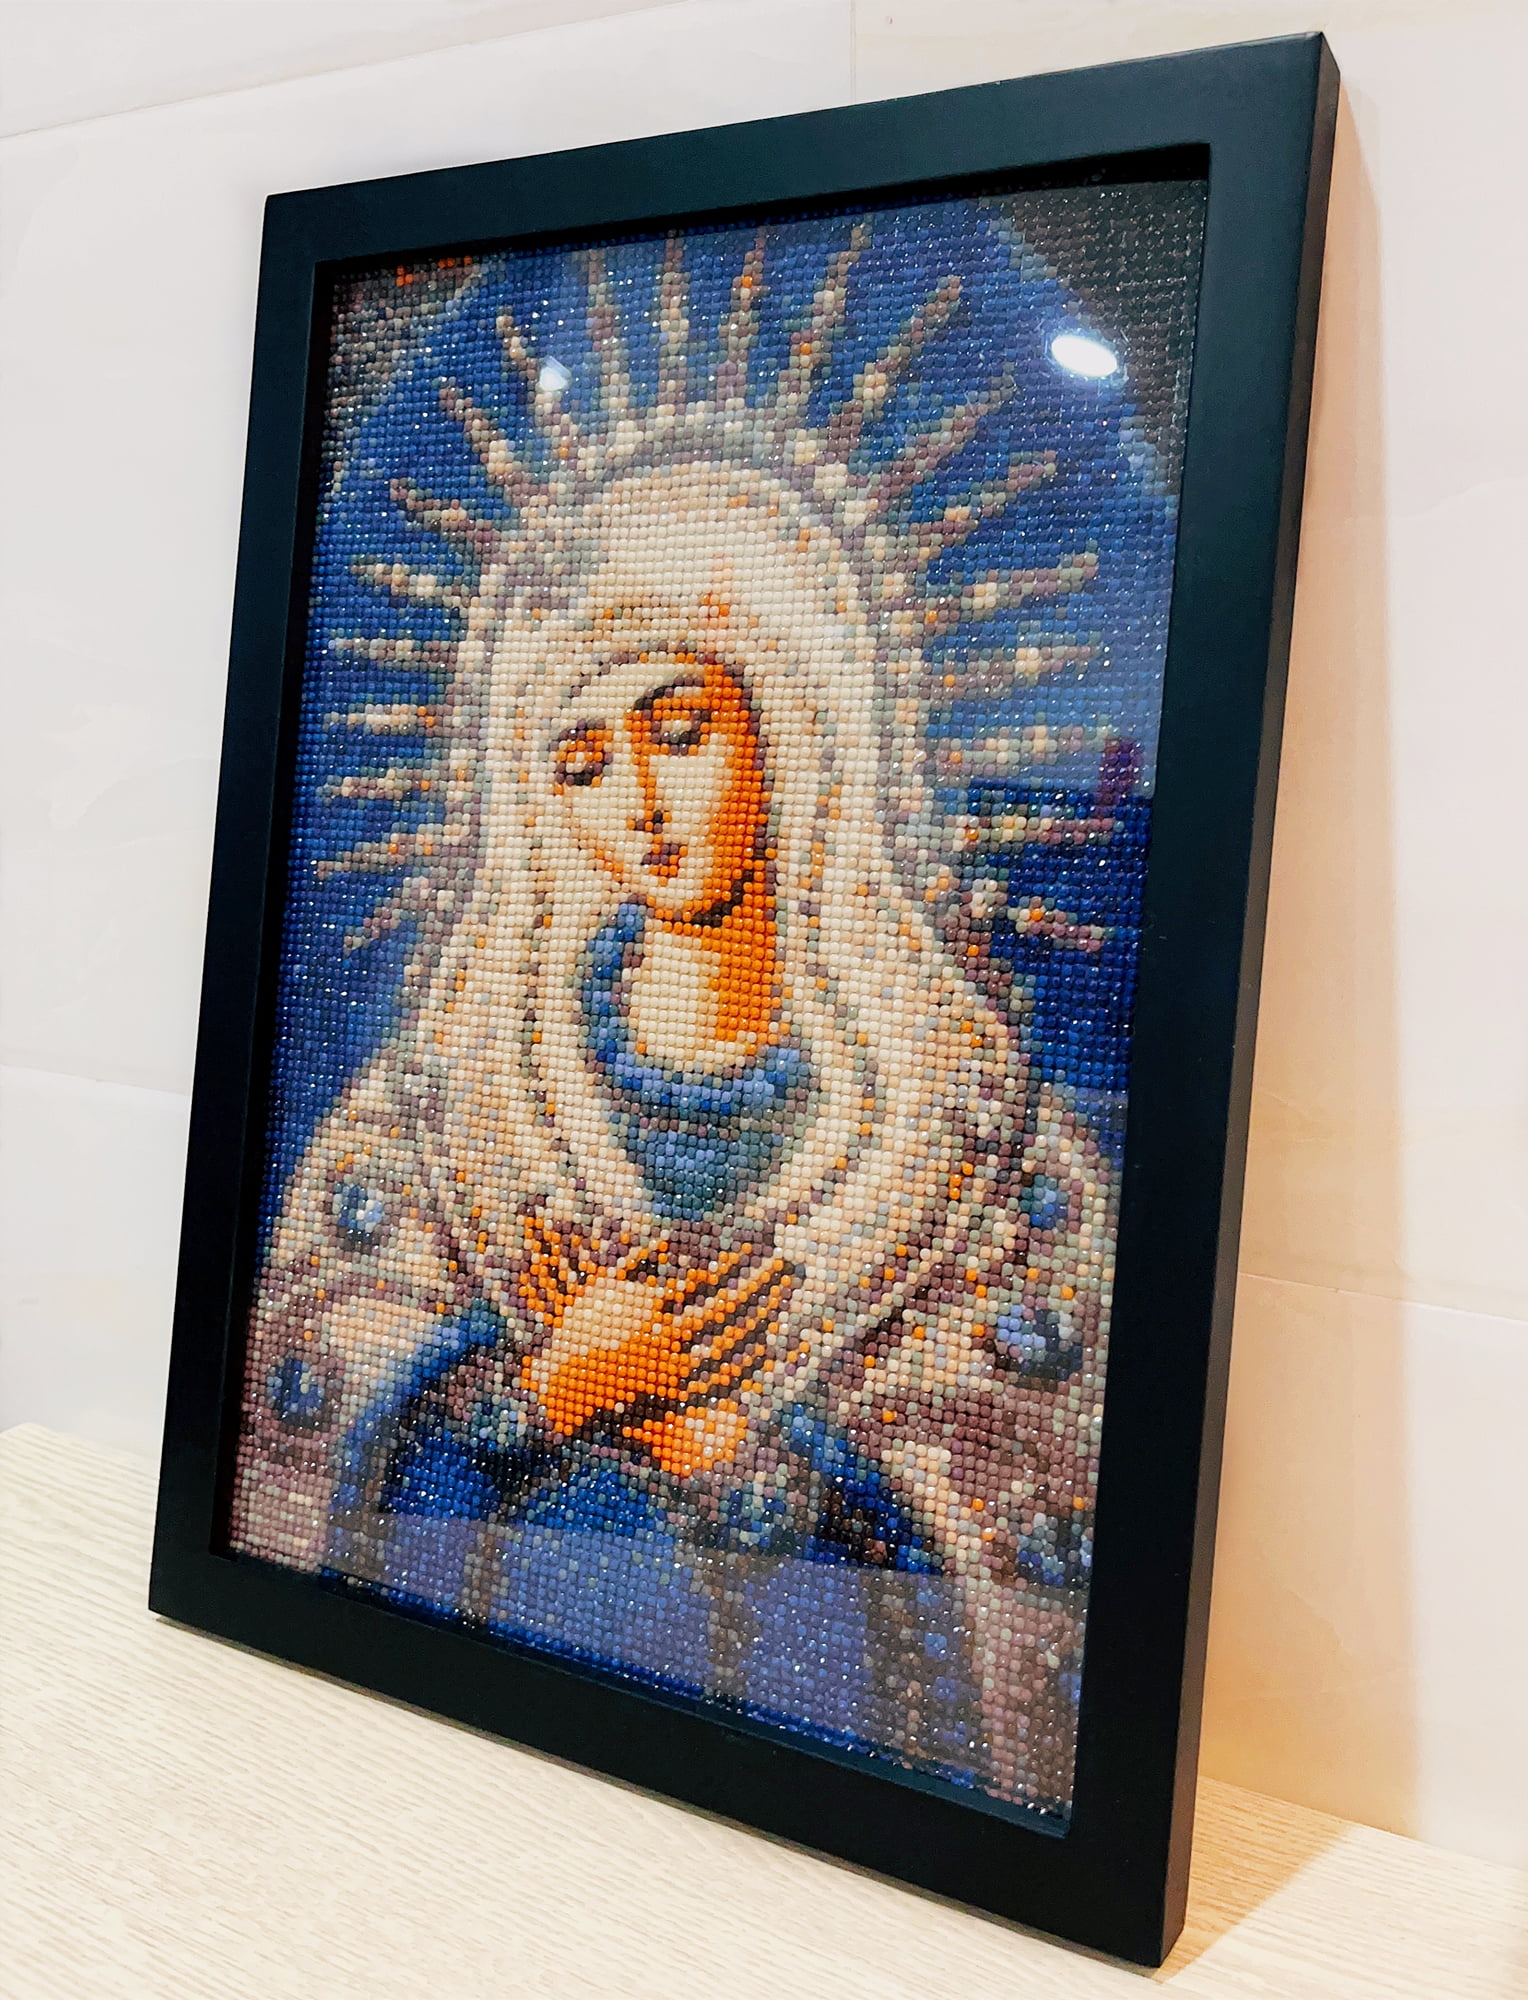 Diamond Painting Kit, 30x40 cm, Round Crystals, Full Drill with Frame, Religious  Diamond Art - Virgin Mary / Mother and Child / ZJ0100